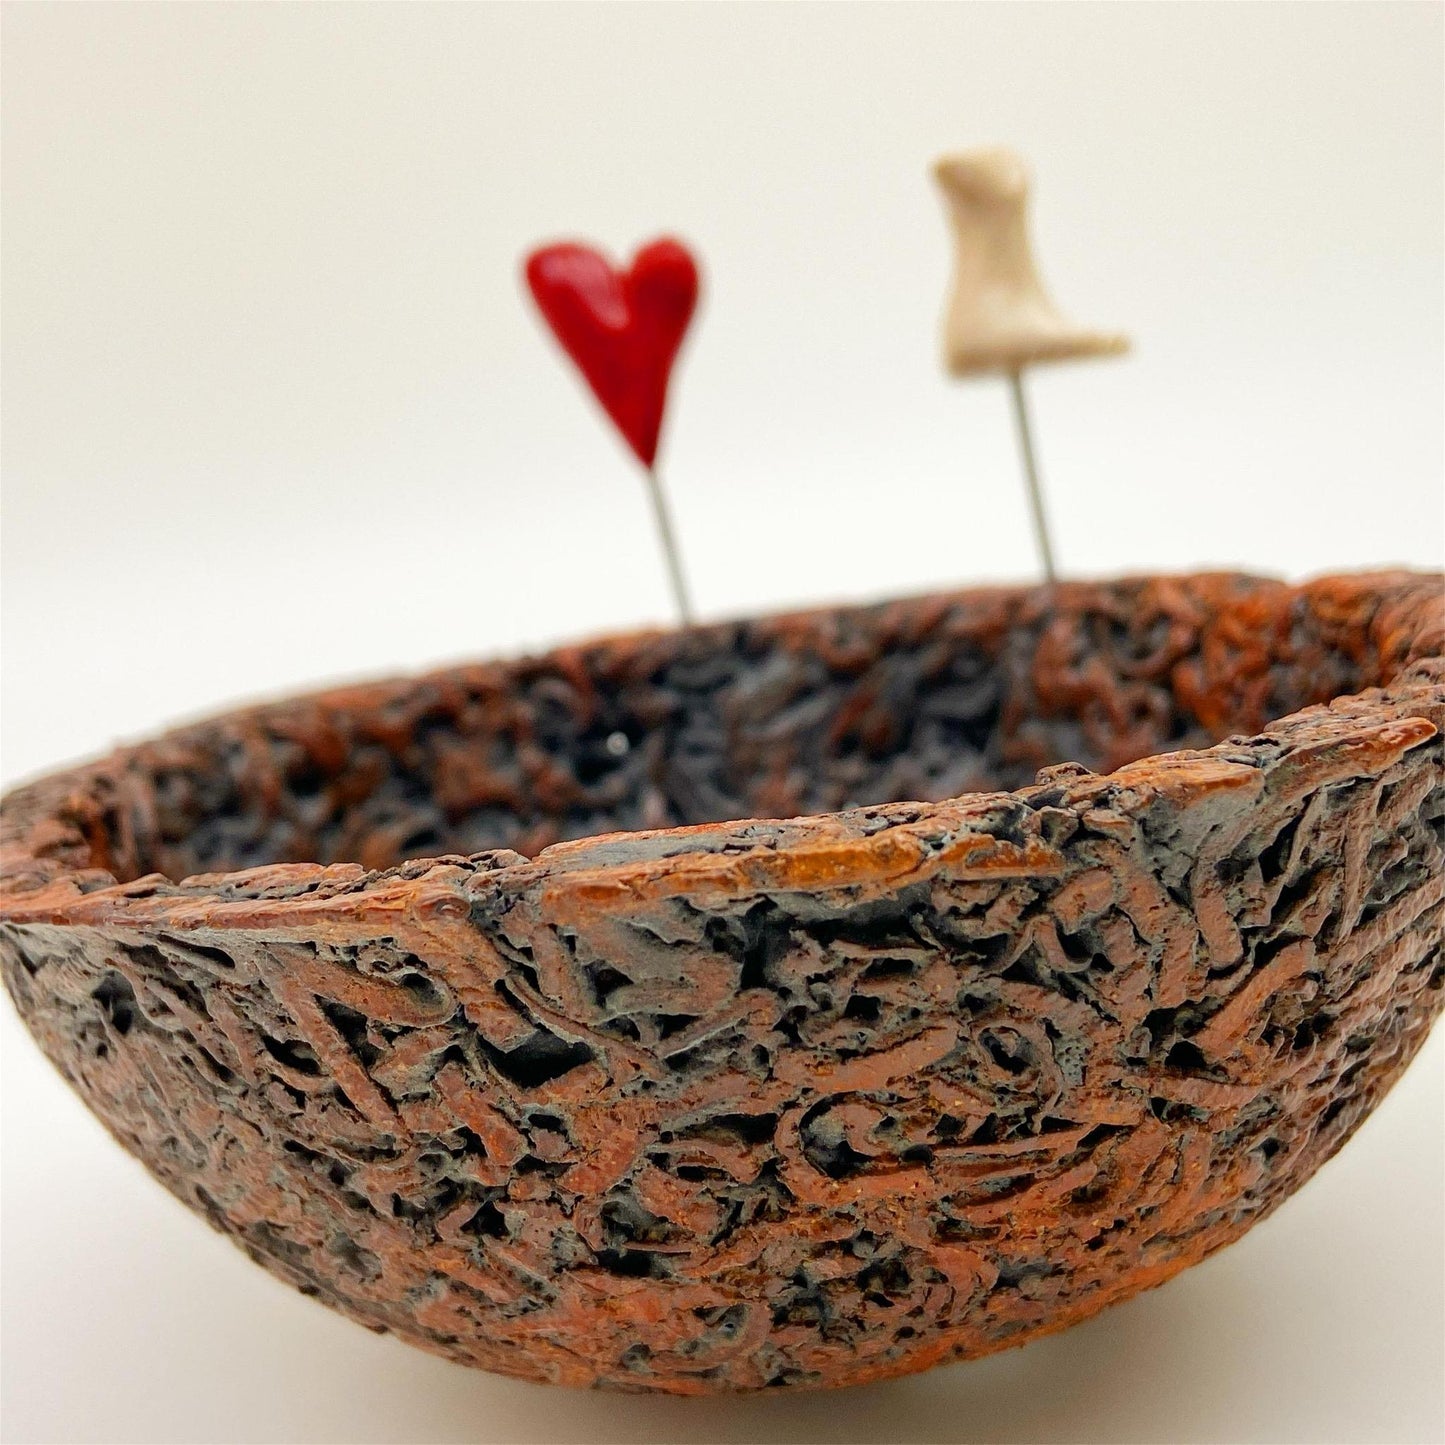 Sculpture - Nest with Bird and Heart - Ceramic